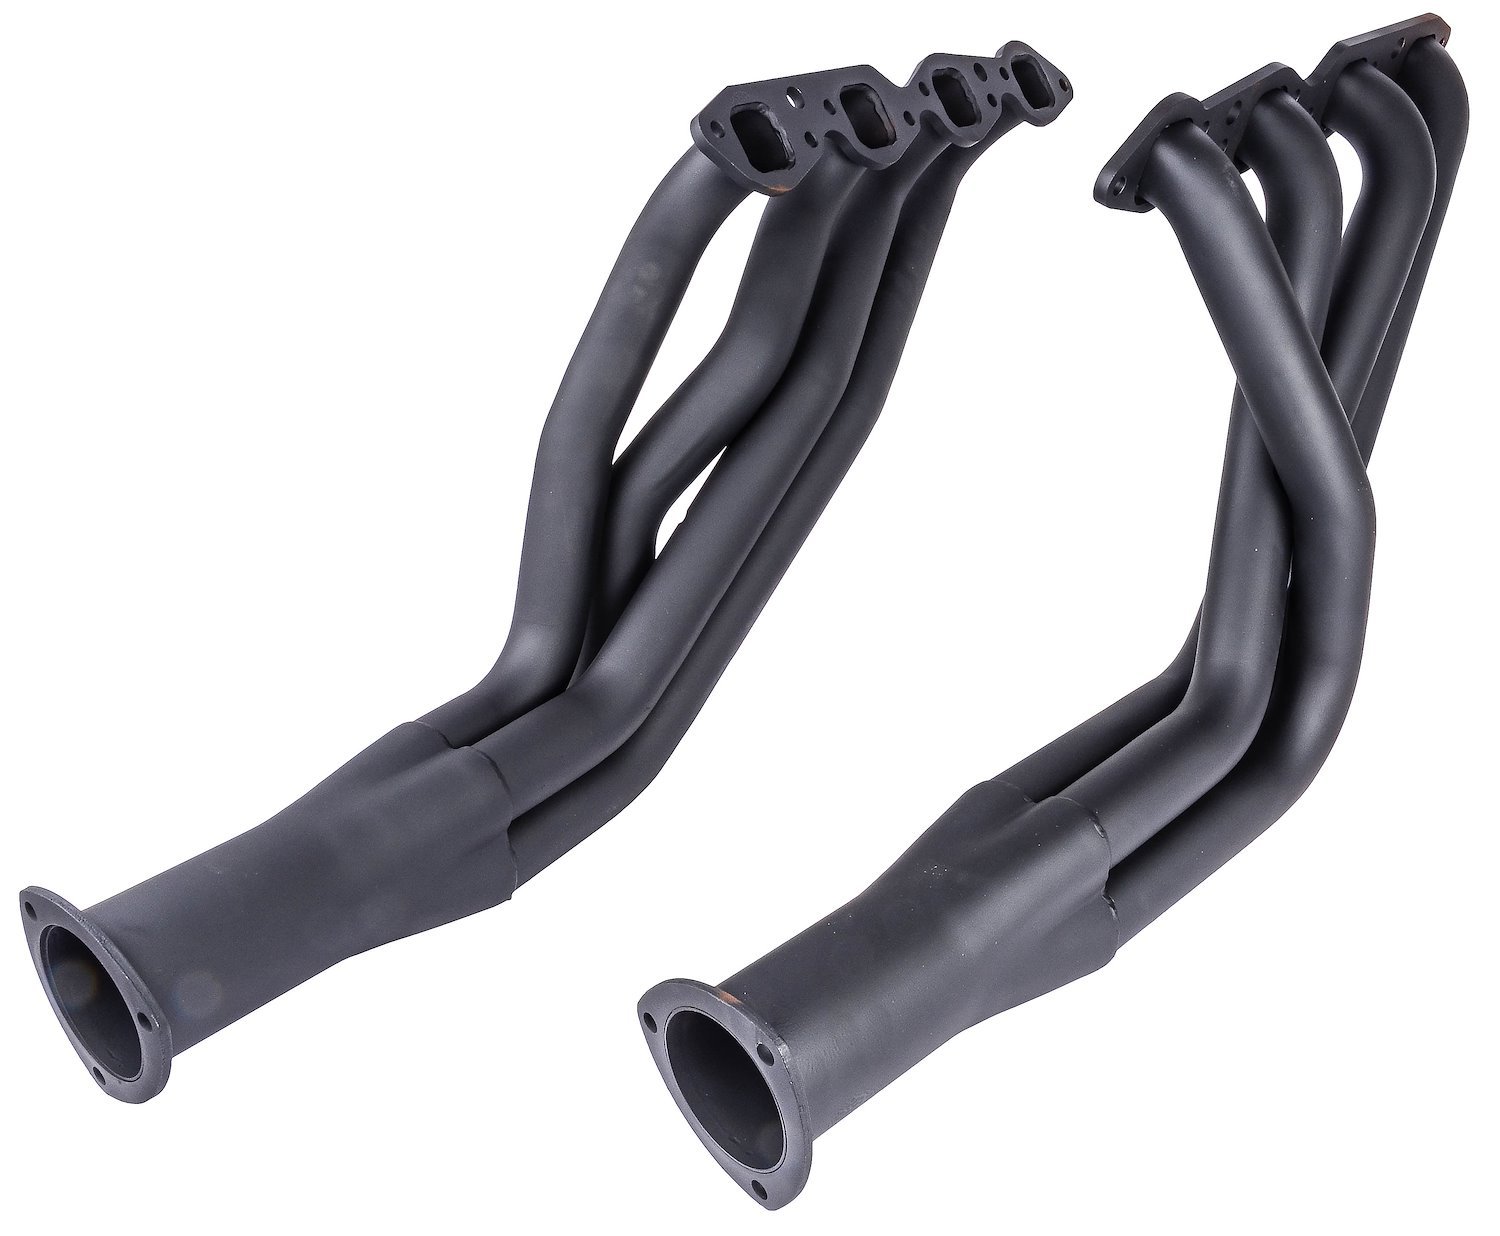 Painted Long Tube Headers Fits Select 1965-1974 Chevrolet Models [Big Block Chevy 396-502 ci]